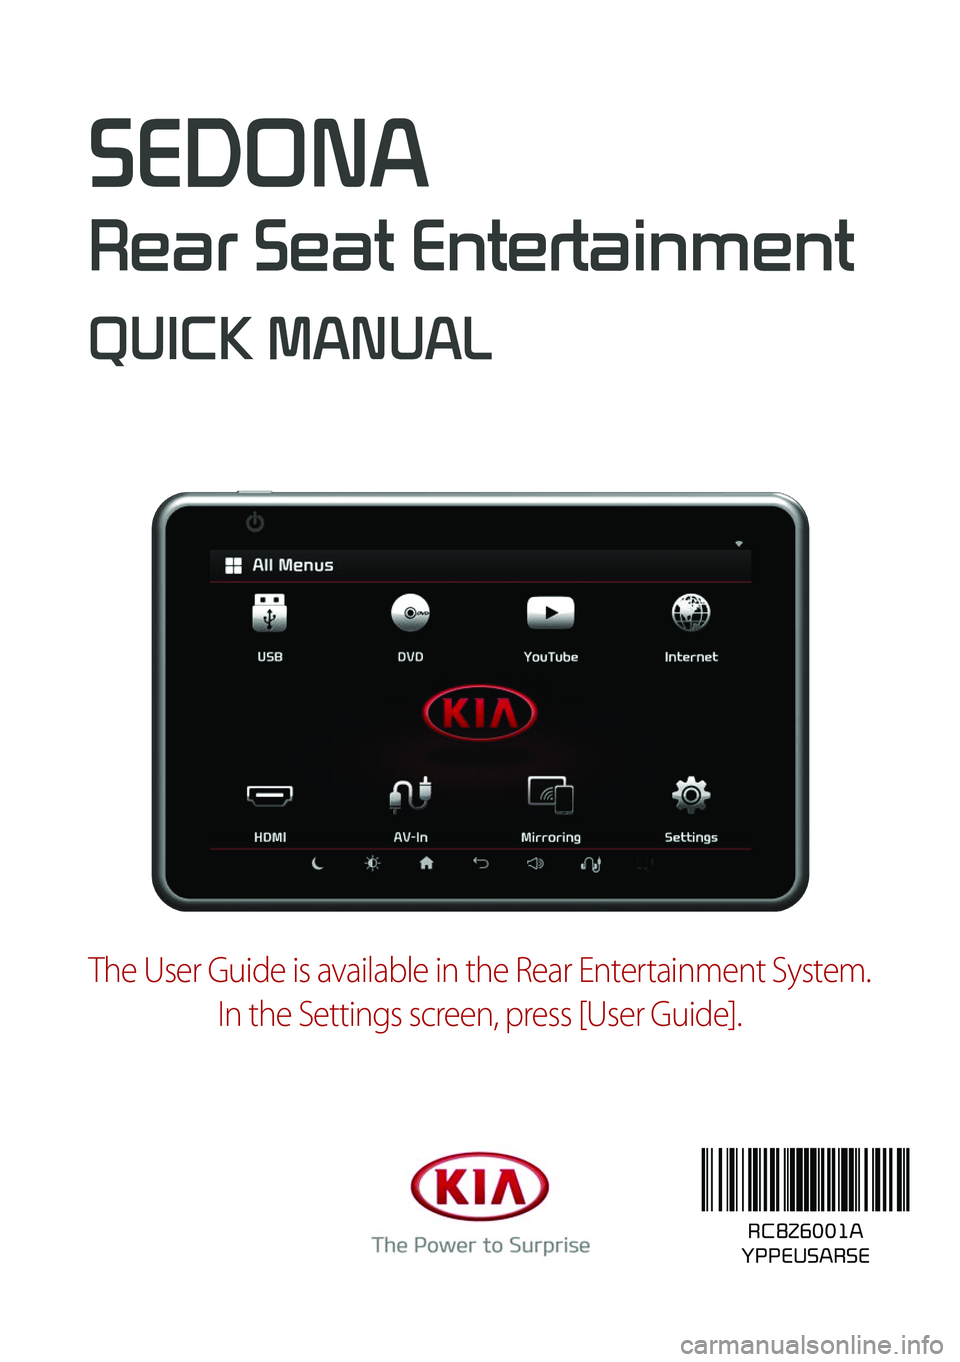 KIA SEDONA 2019  Rear Seat Entertainment System SEDONA 
Rear Seat Entertainment
QUICK MANUAL
RC8Z6001ARC8Z6001A
YPPEUSARSE
The User Guide is available in the Rear Entertainment System.In the Settings screen, press [User Guide].  